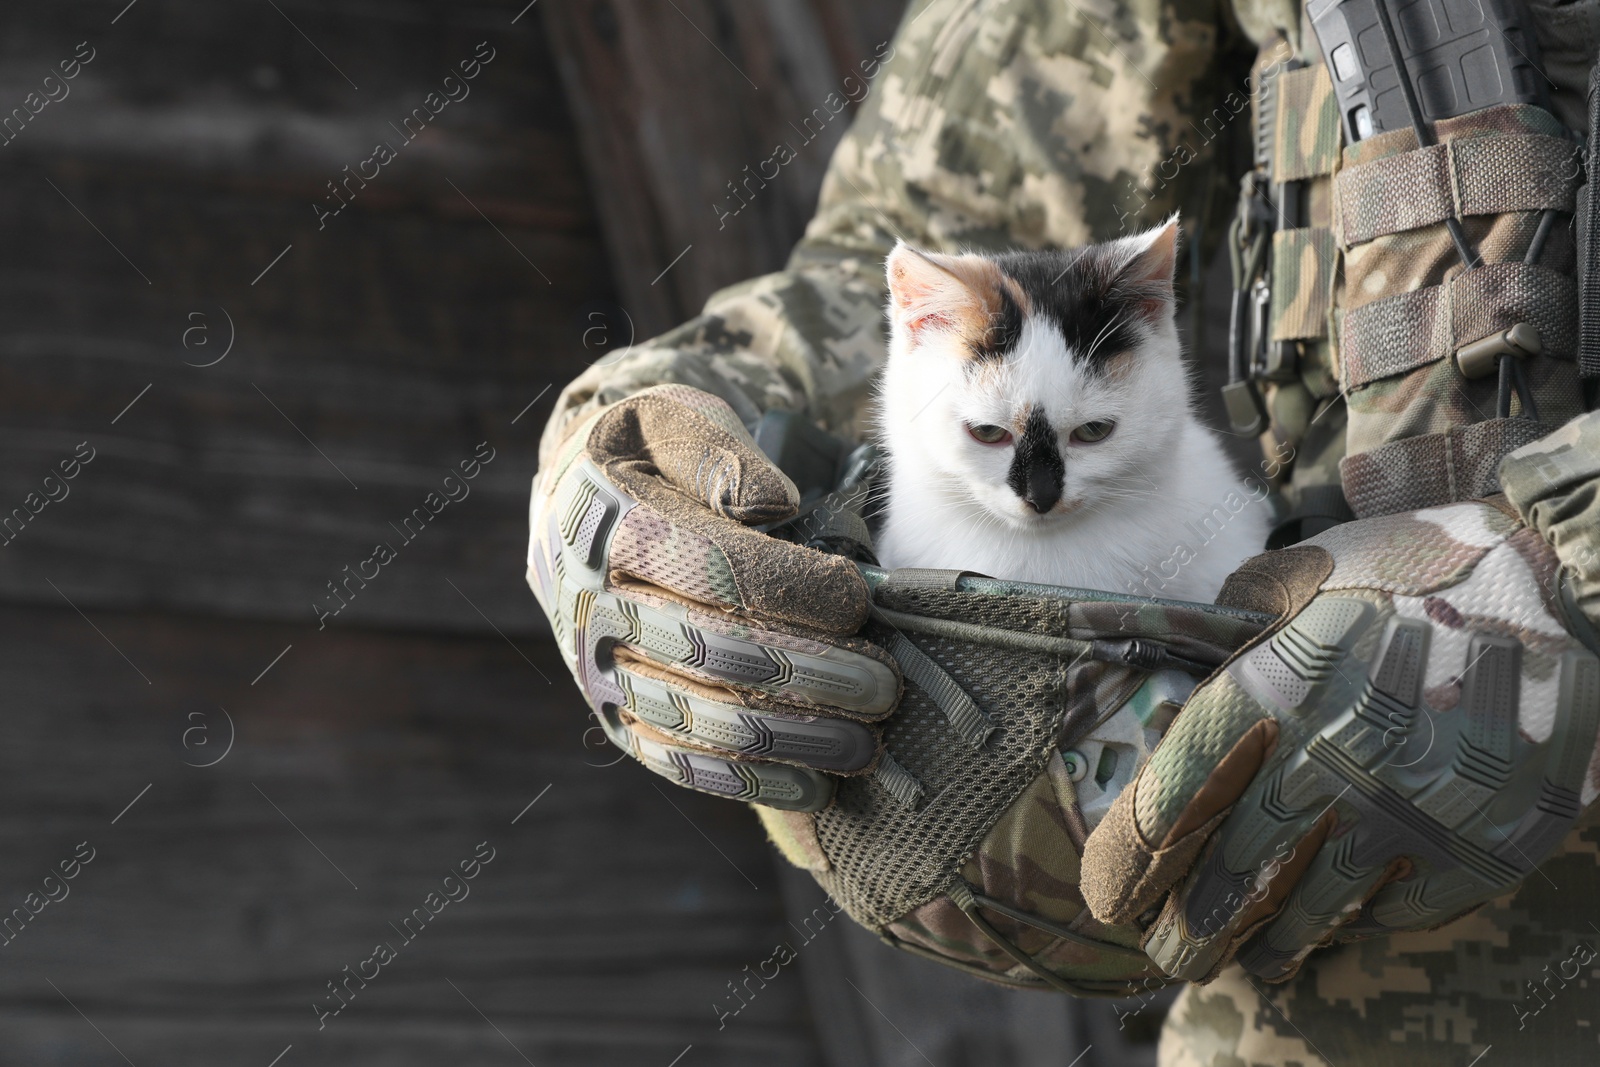 Photo of Ukrainian soldier rescuing animal. Little stray cat sitting in helmet, closeup. Space for text